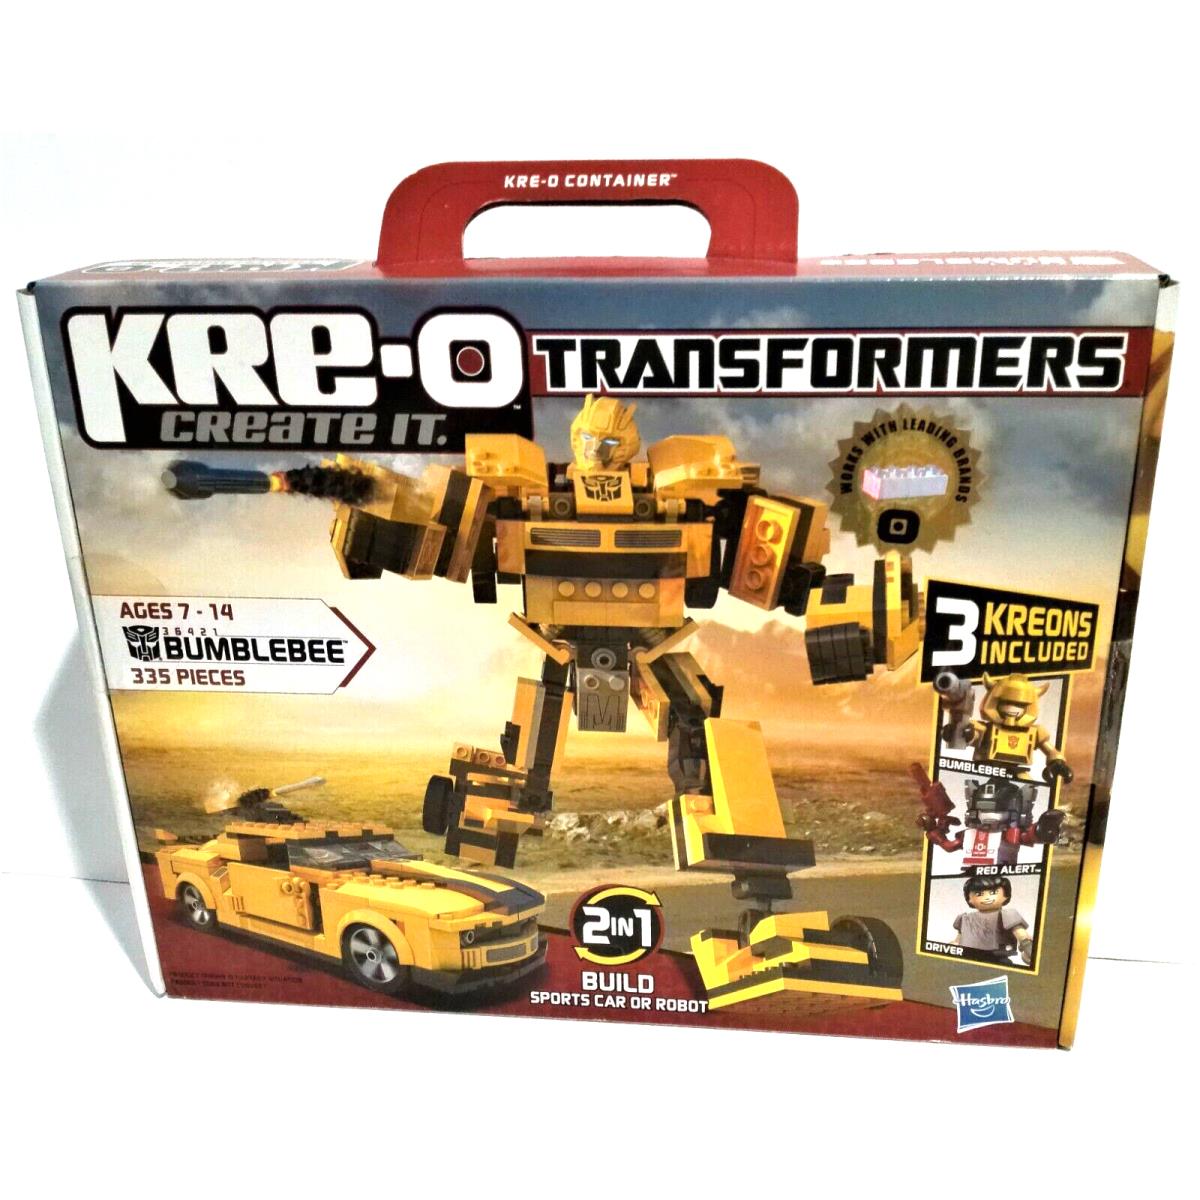 Lego Kre-o Create IT Transformers 36421 Bumbleebee Build Sports Car or Robot Misb